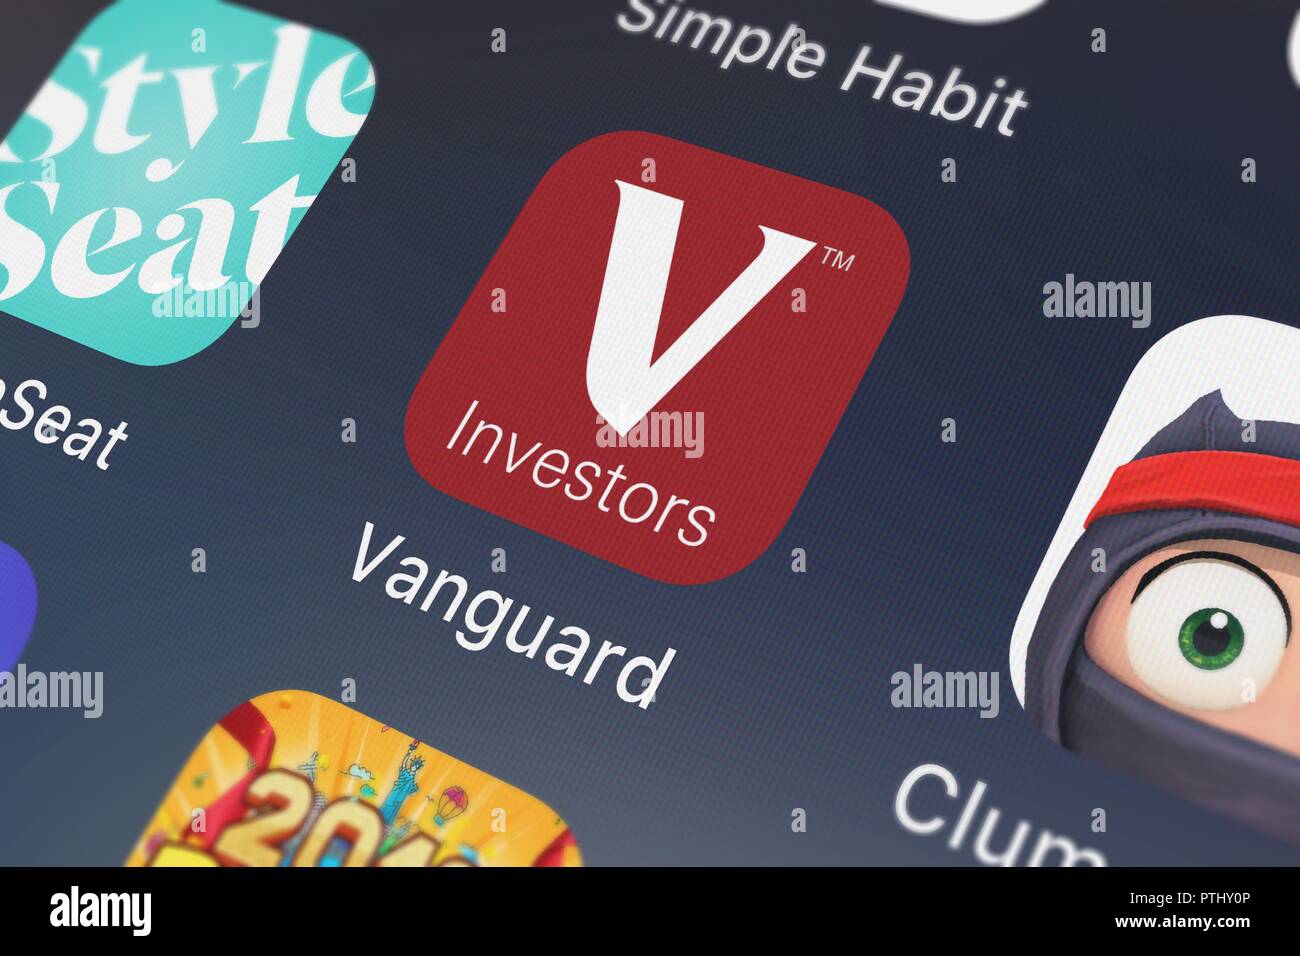 London, United Kingdom - October 09, 2018: Screenshot of the Vanguard for iPad mobile app from The Vanguard Group, Inc. icon on an iPhone. Stock Photo